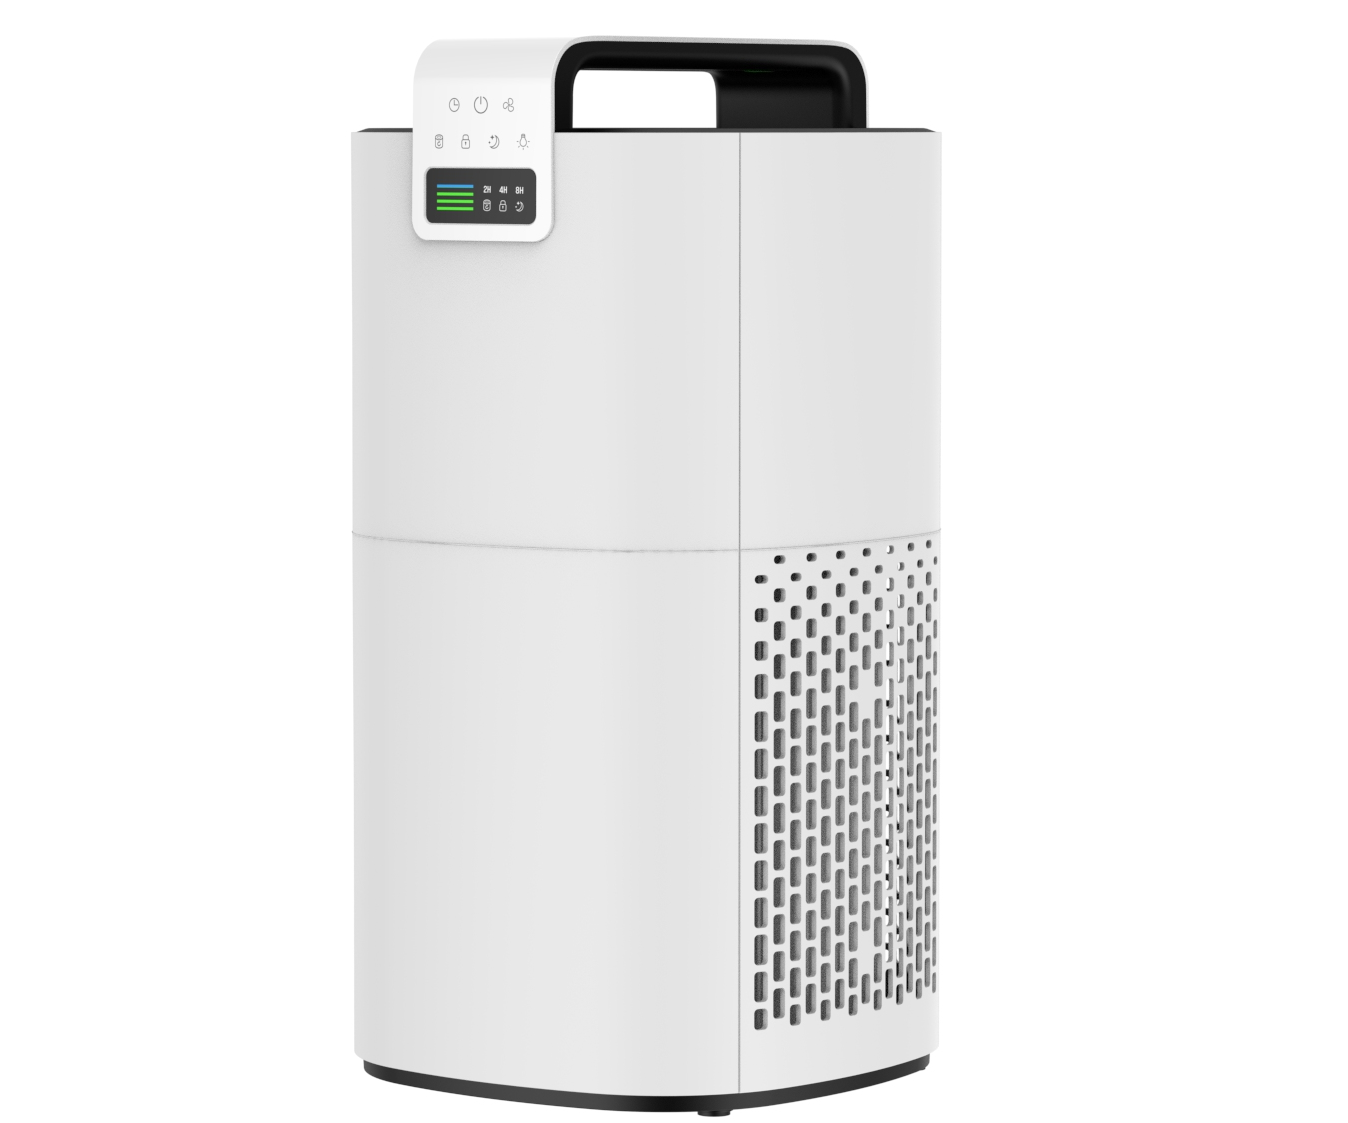 The Cutting-Edge Technology of JNUO Air Purifier